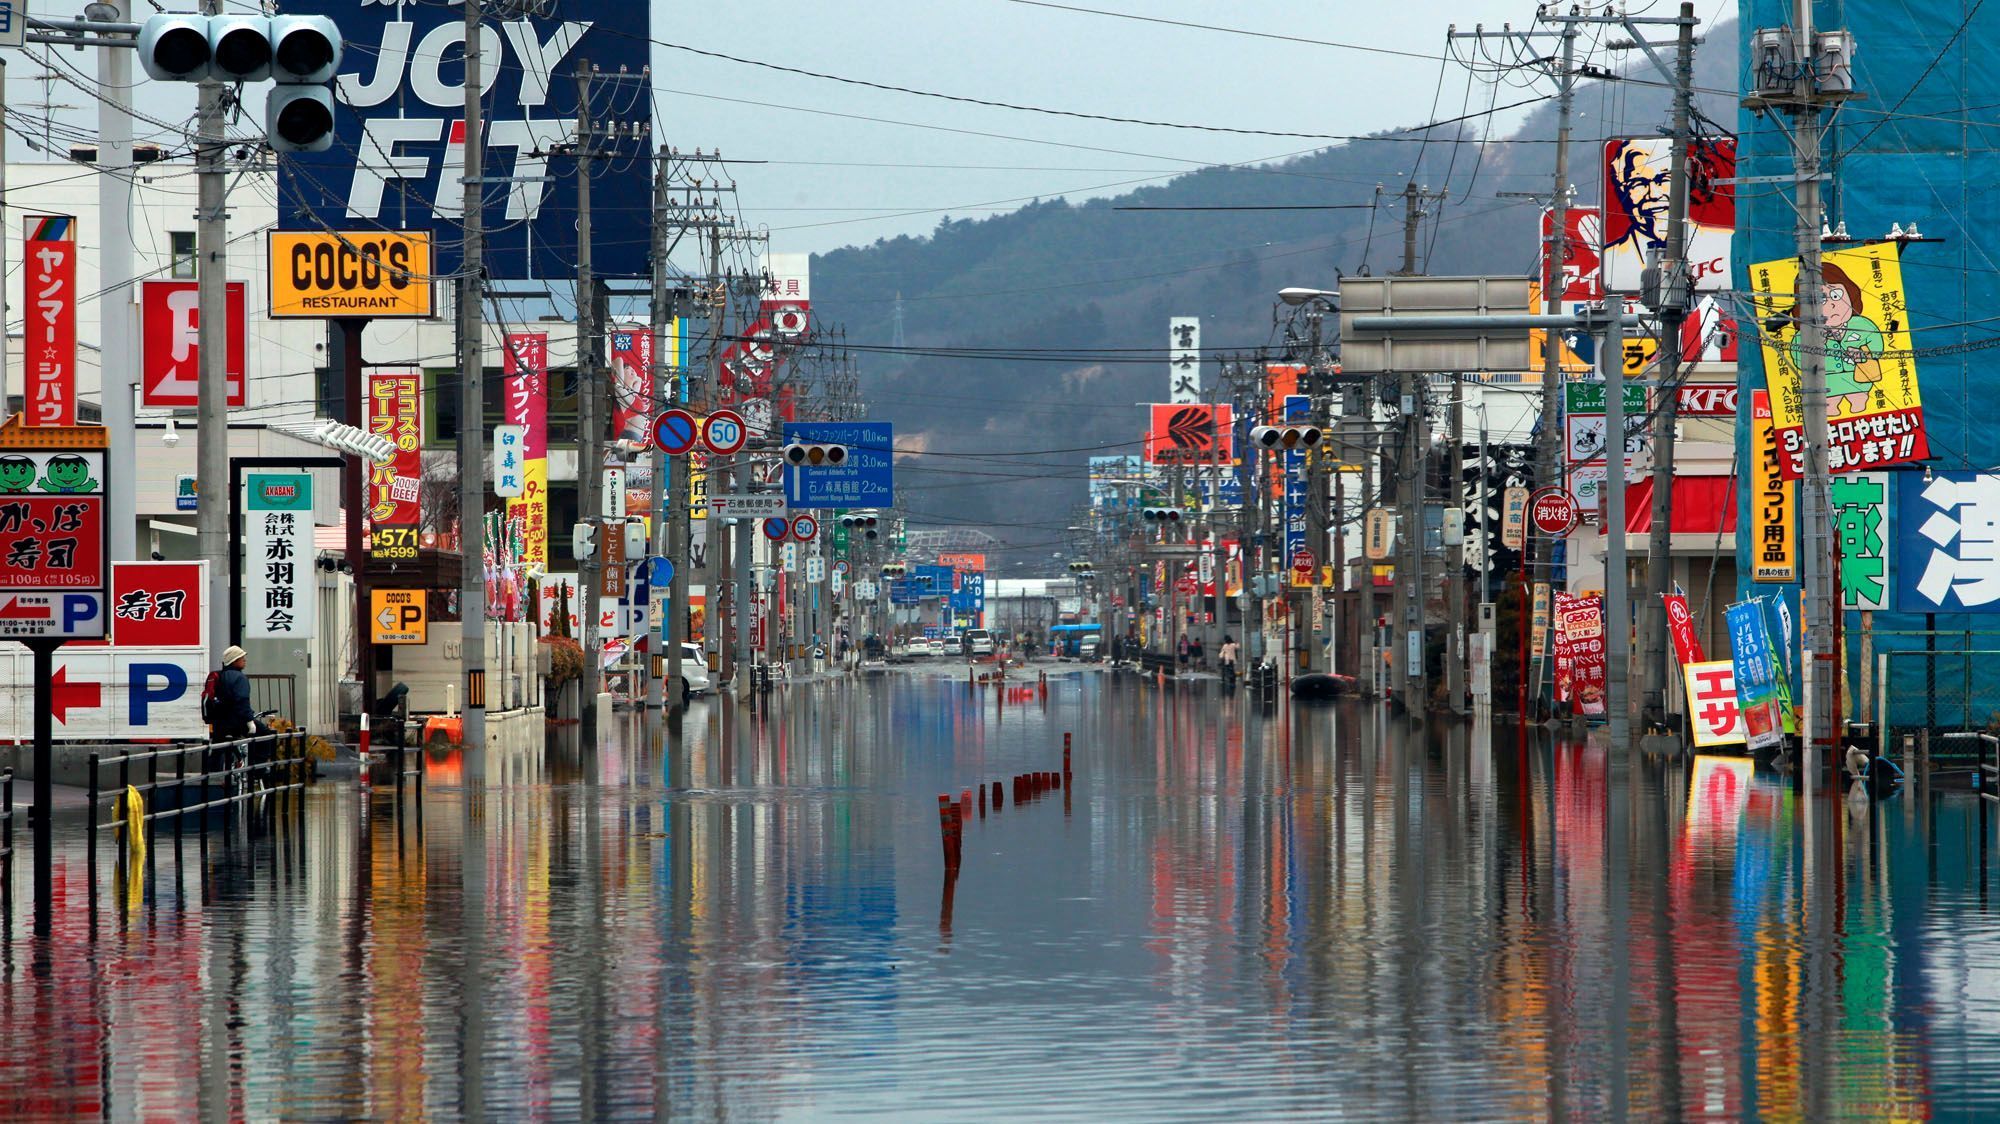 The waters of the tsunami were still evident in the Japanese town of Ishinomaki days after the March 11, 2011 tsunami.